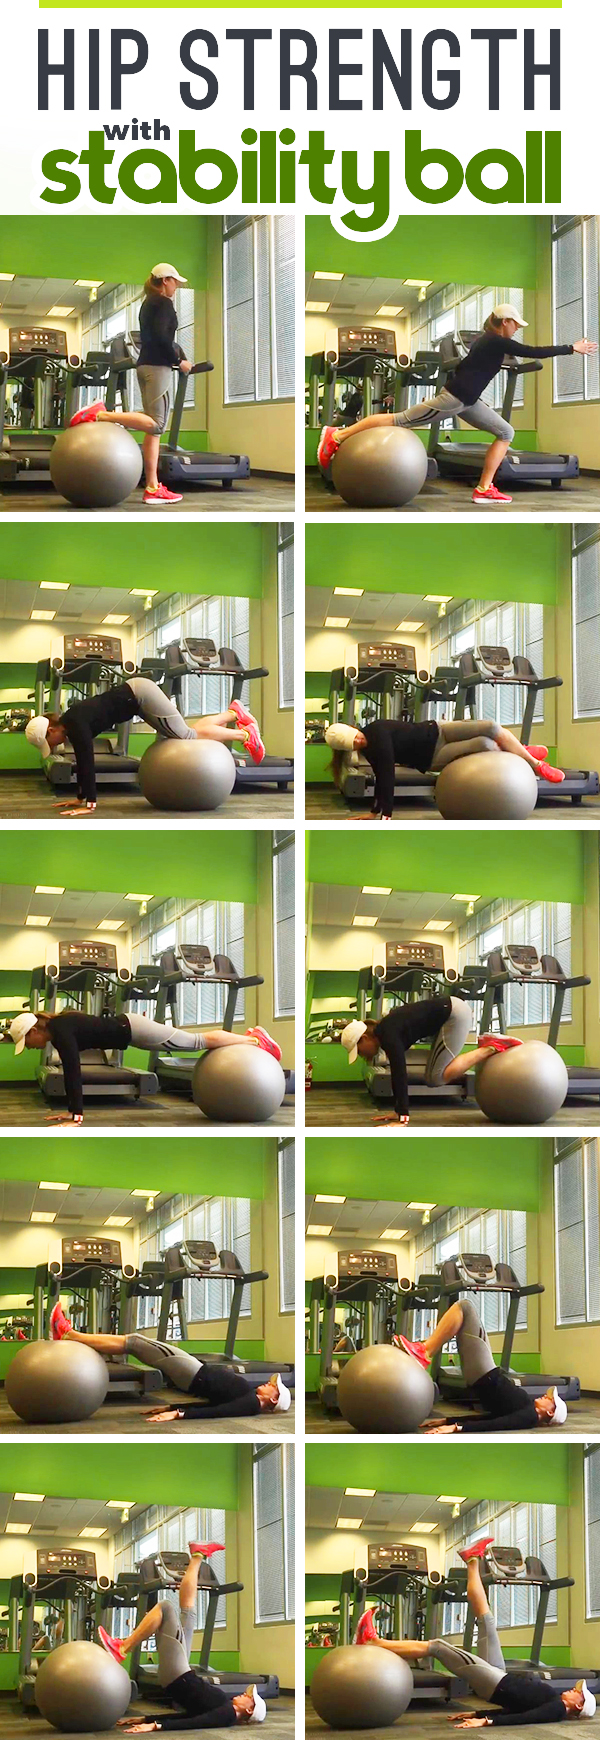 Improve Hip Strength with Stability Ball to prevent IT Band Syndrome and runner's knee